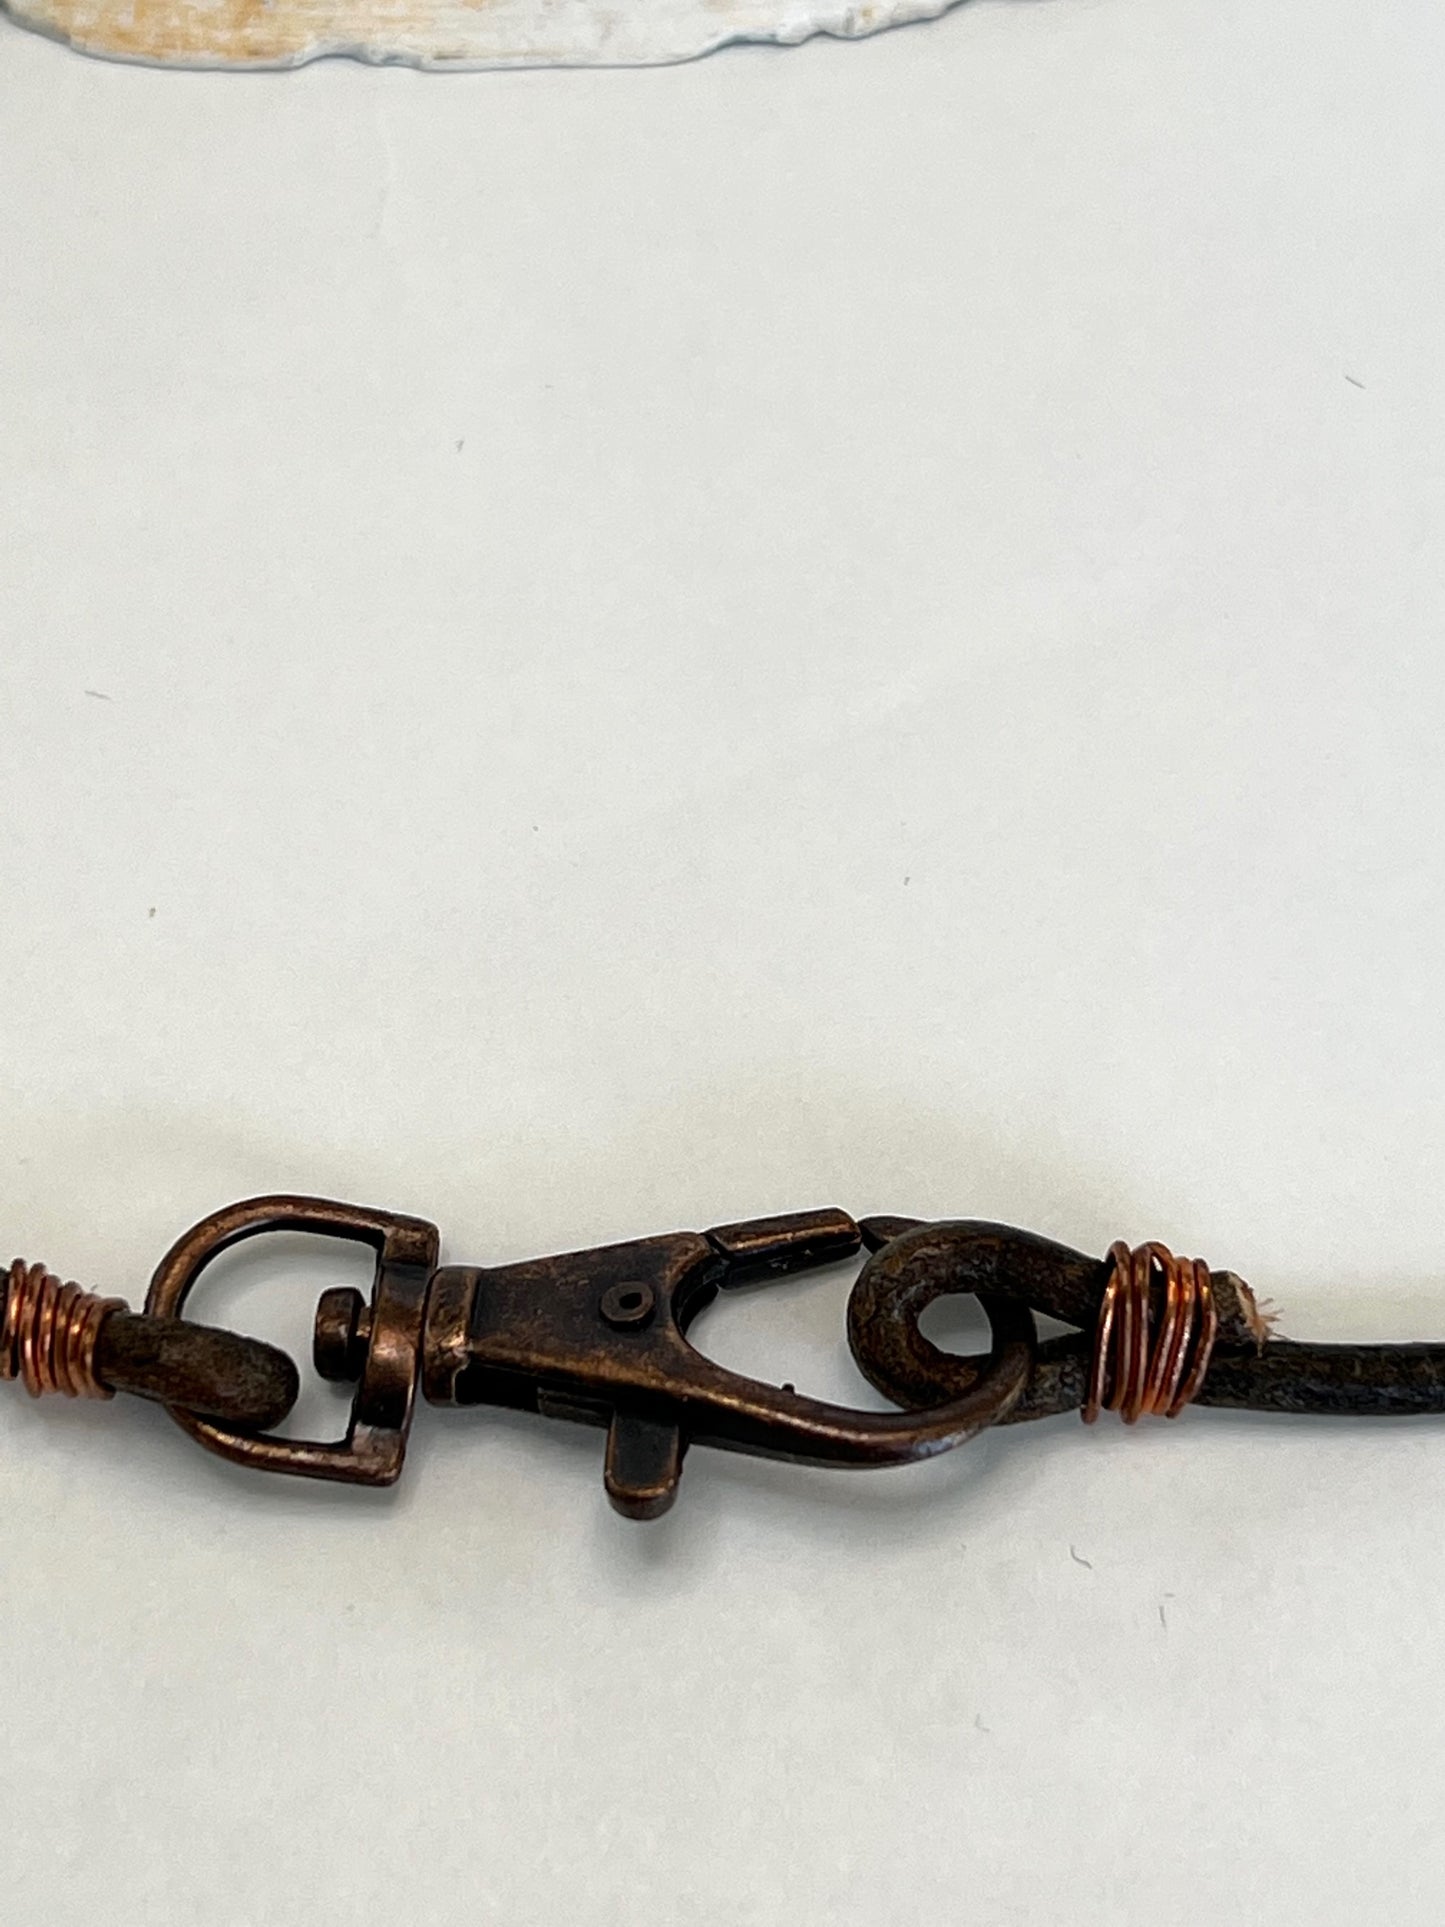 Leather Necklace with large copper lobster clasp as focal design. Distressed Italian dark brown soft leather.